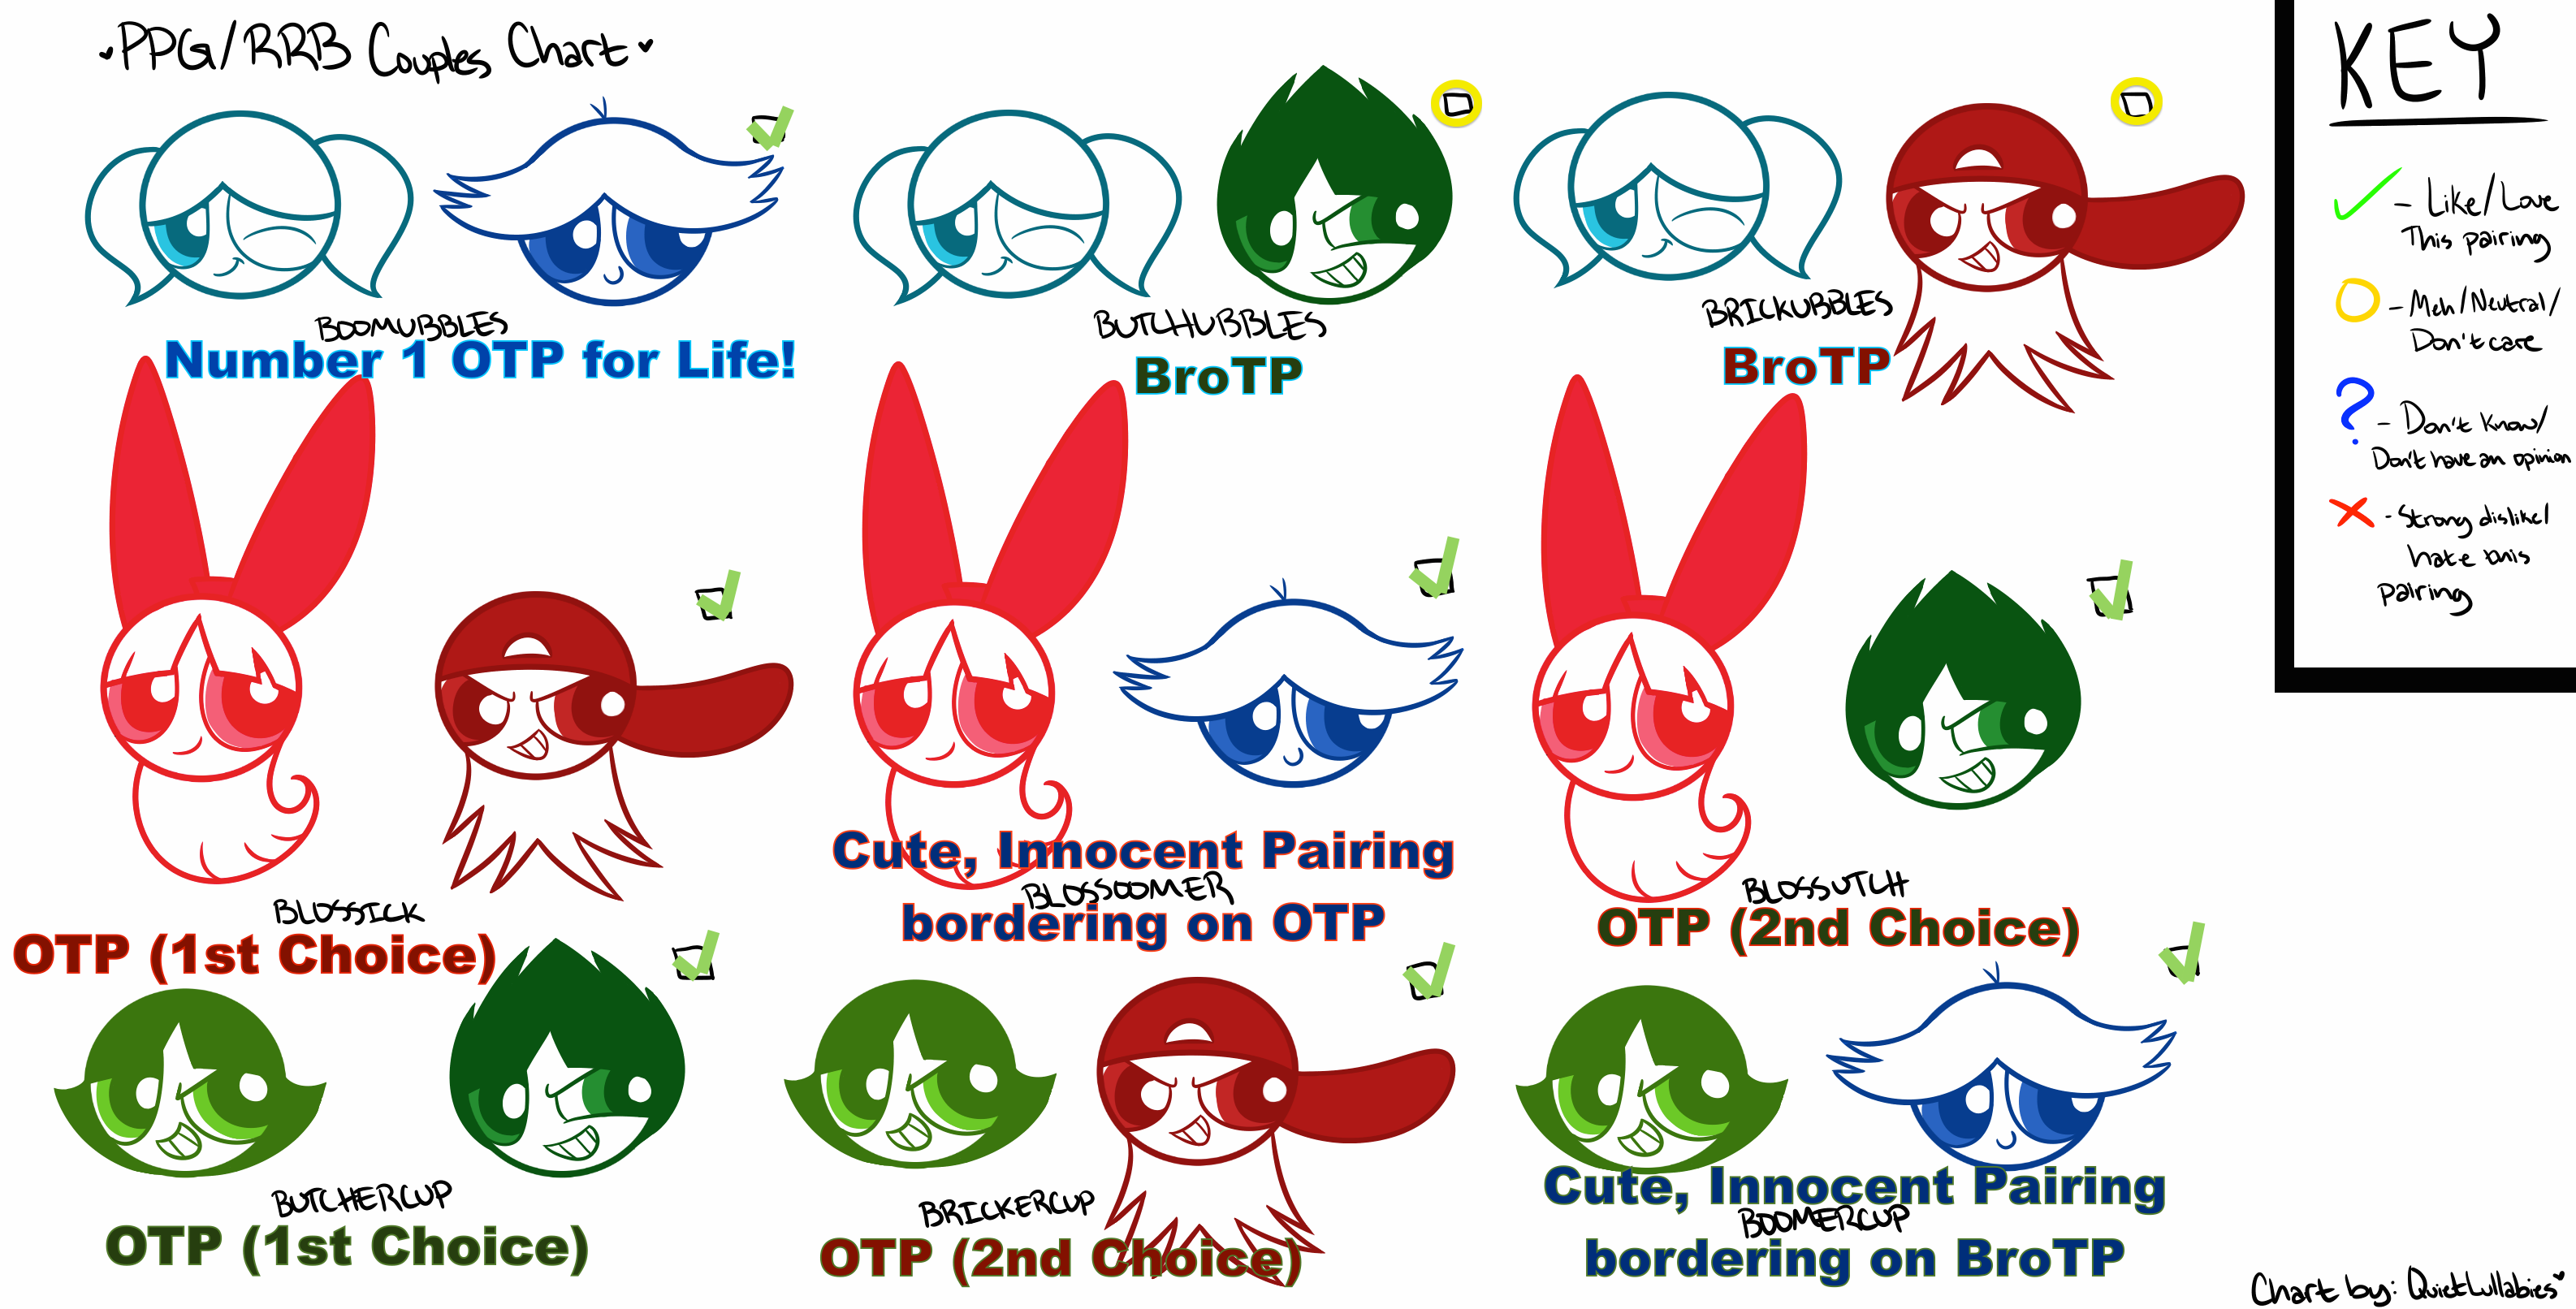 ppgrrb_shipping_chart_by_quietlullabies-d92yg7k.png